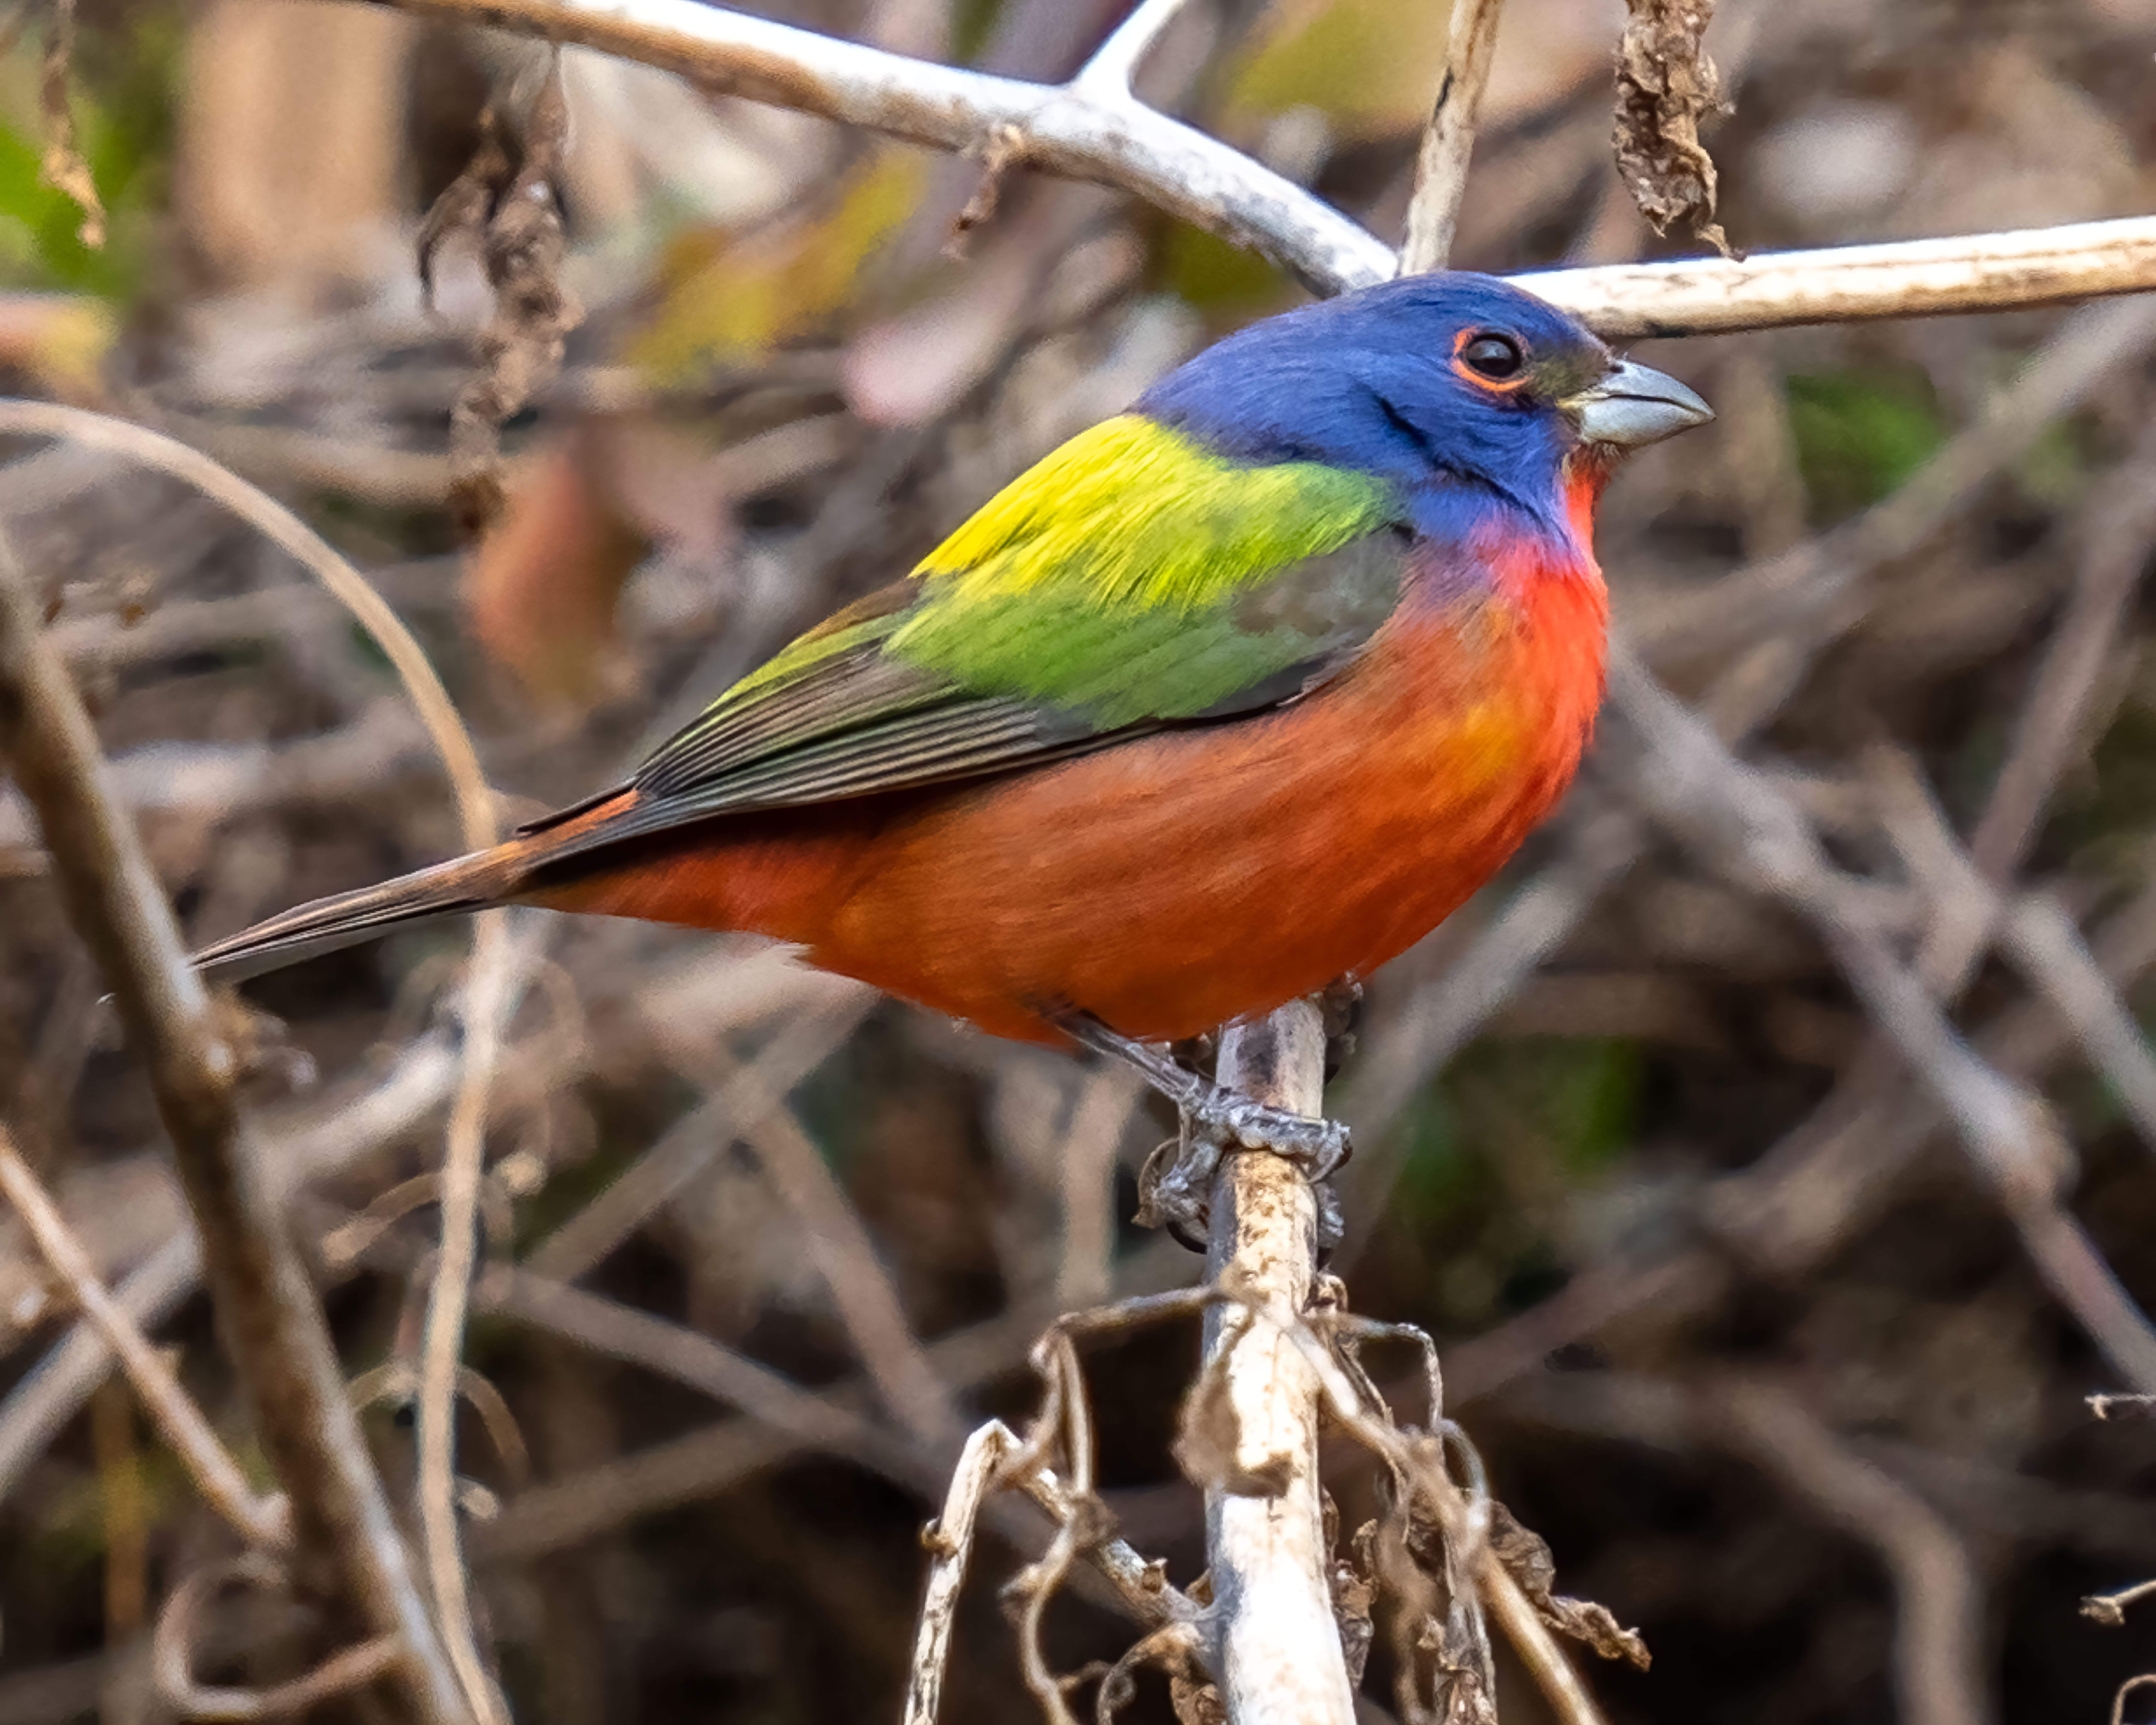 Rare find of Painted Bunting